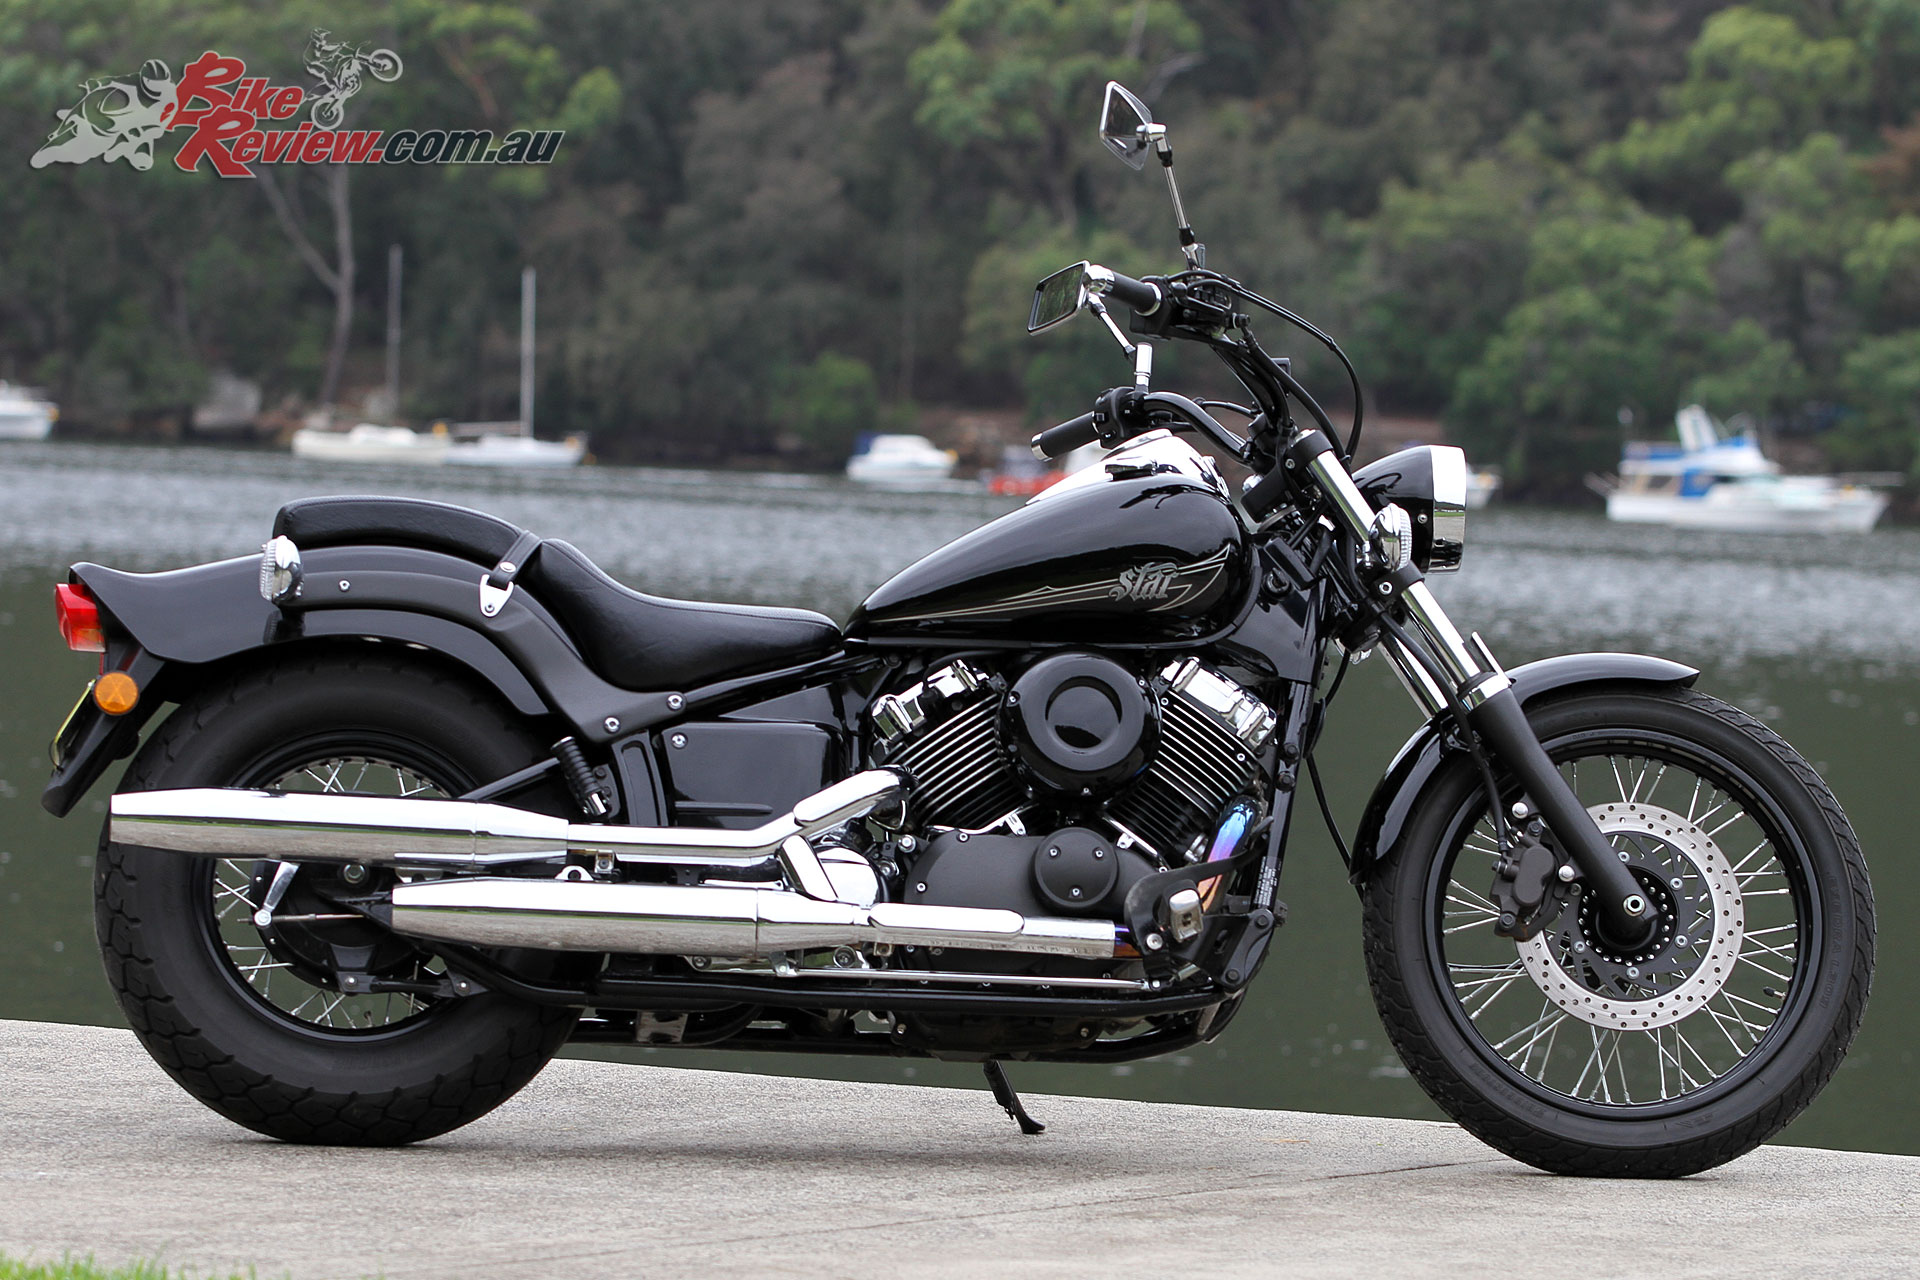 The Yamaha V-Star 650 Custom (XVS650) is a great option to consider for the more demanding new rider after a cruiser